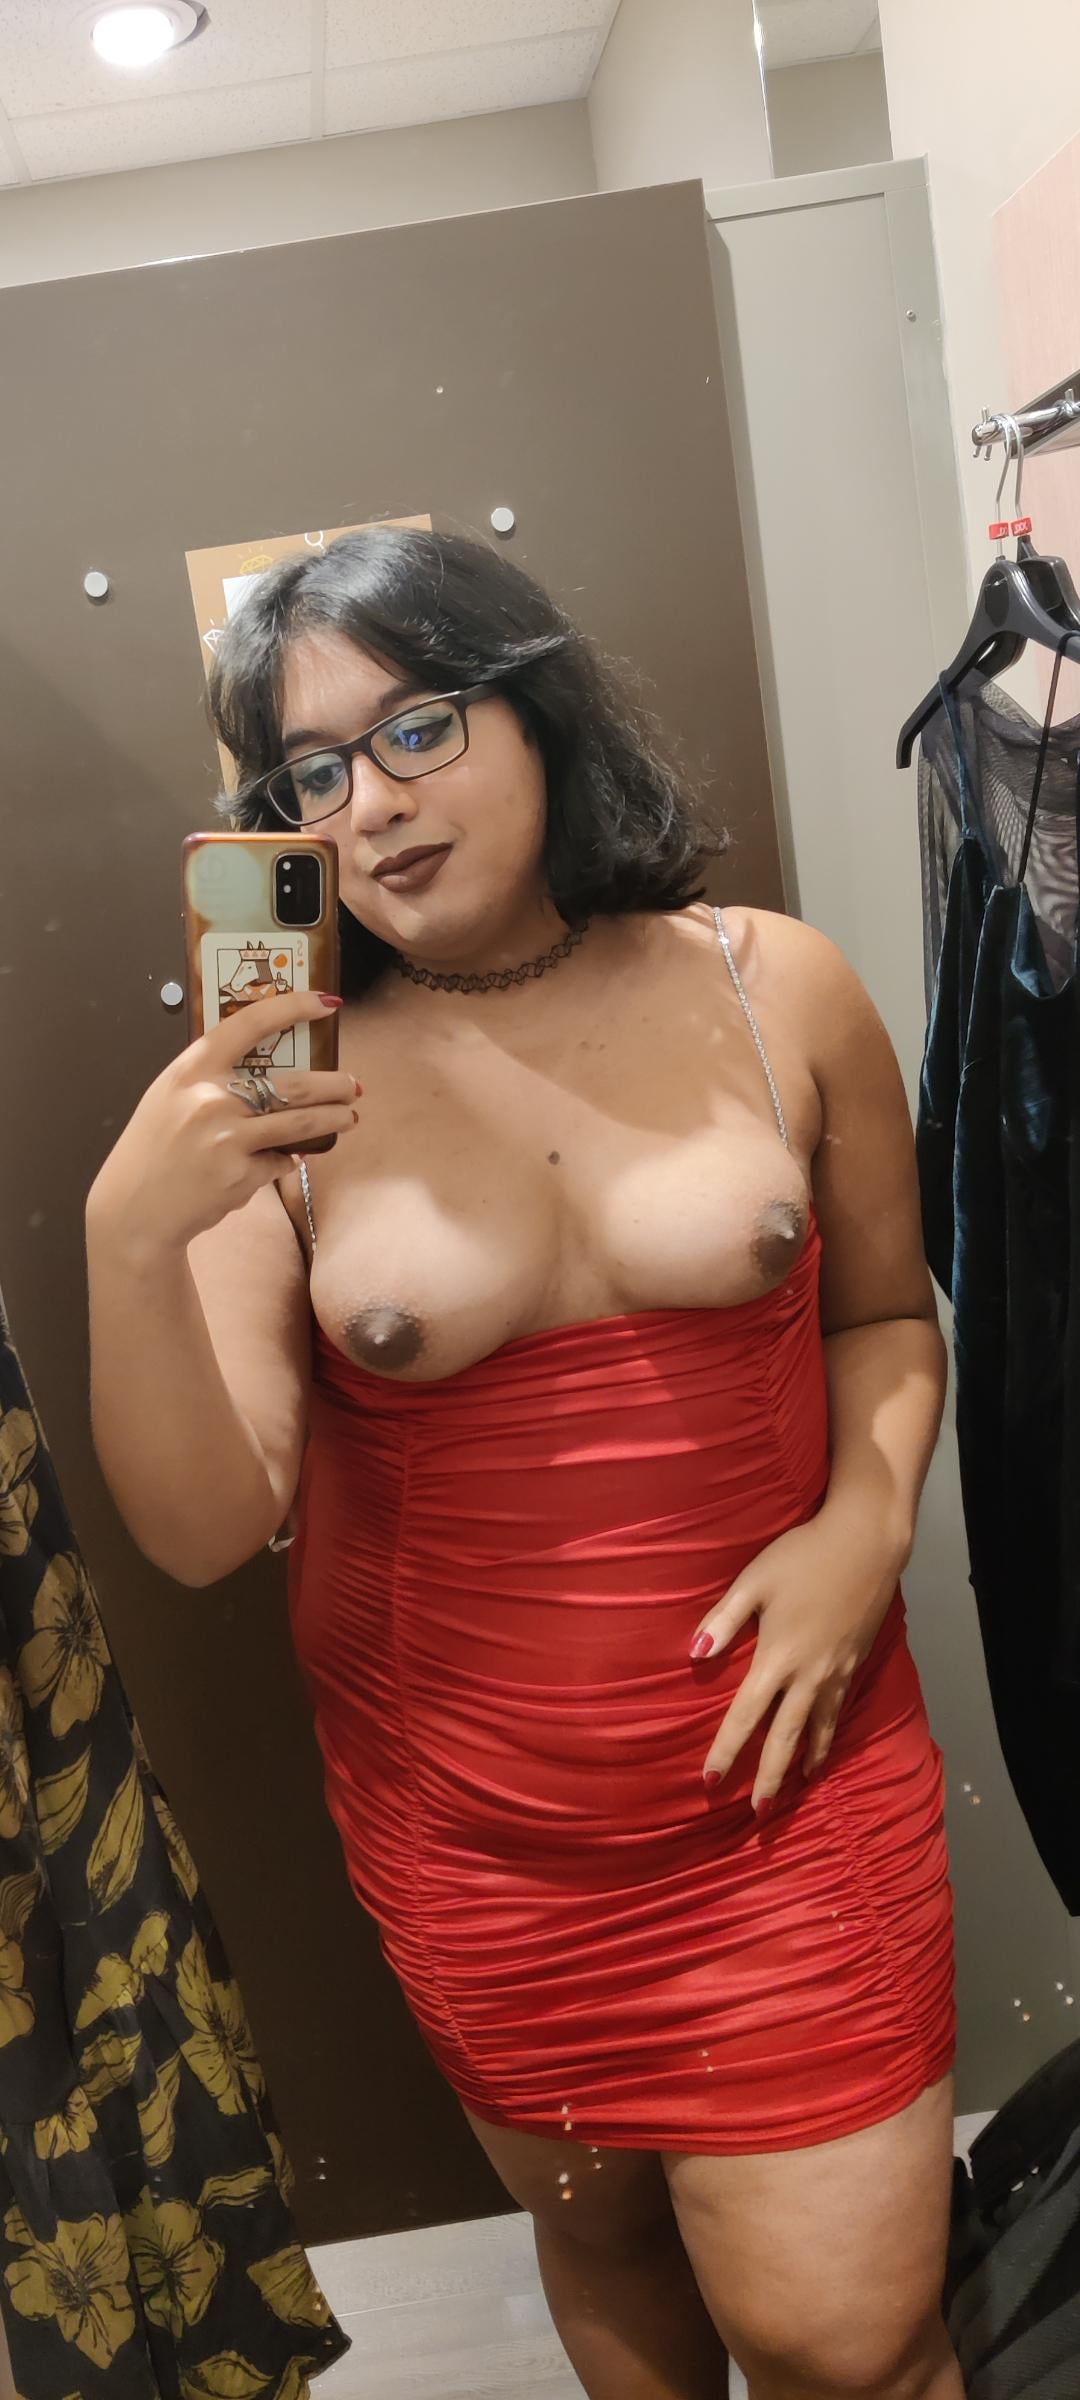 Would you fuck me in the changing rooms if I